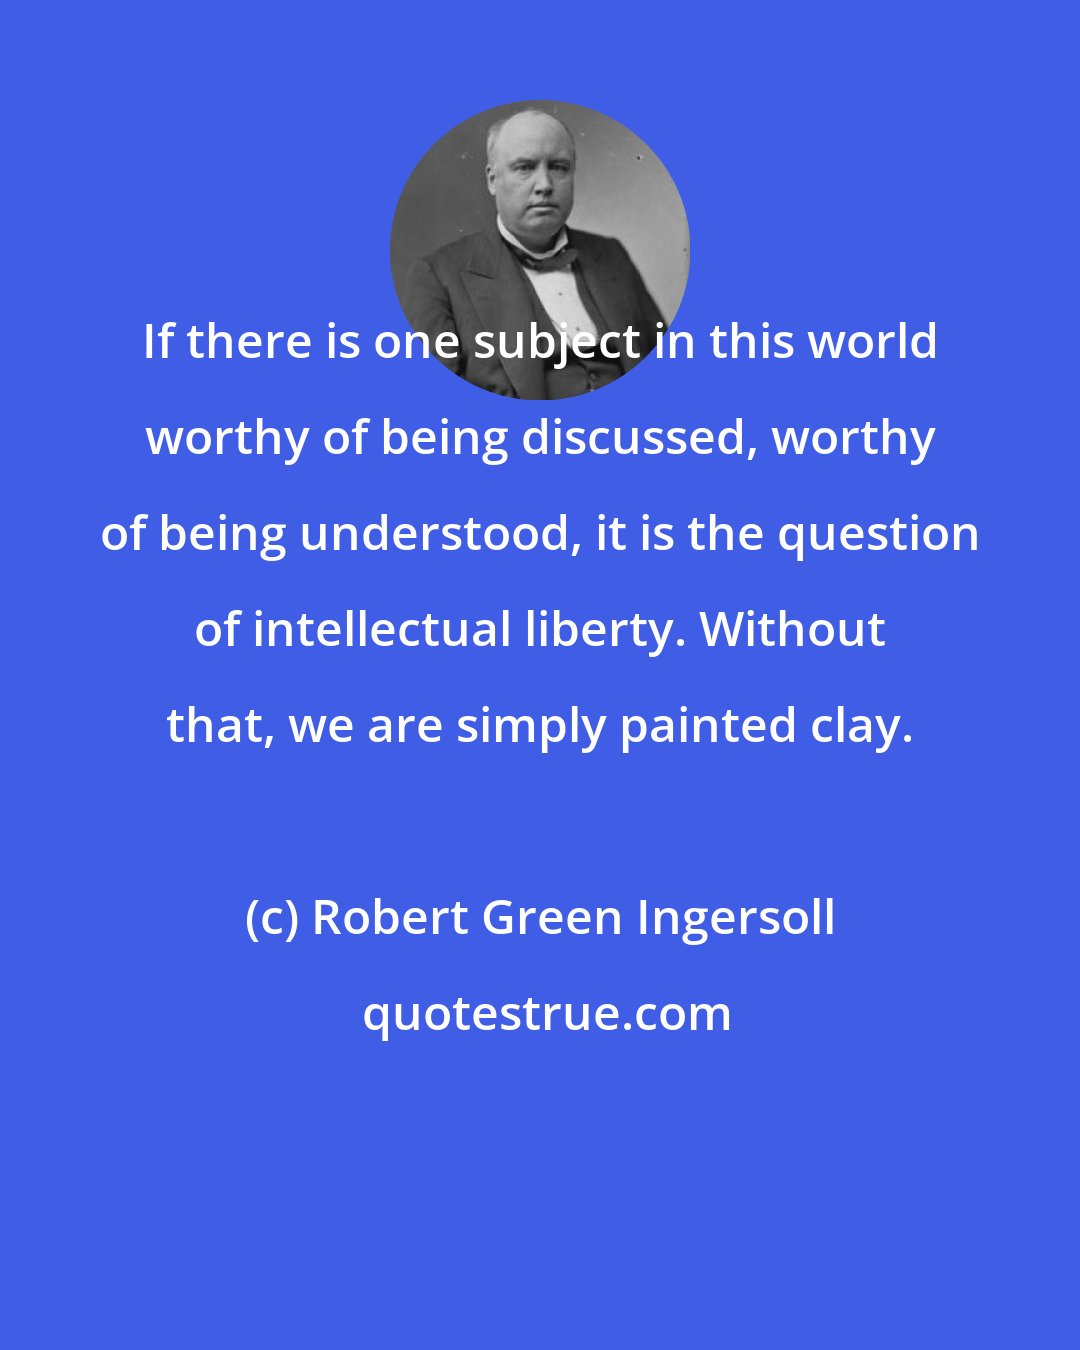 Robert Green Ingersoll: If there is one subject in this world worthy of being discussed, worthy of being understood, it is the question of intellectual liberty. Without that, we are simply painted clay.